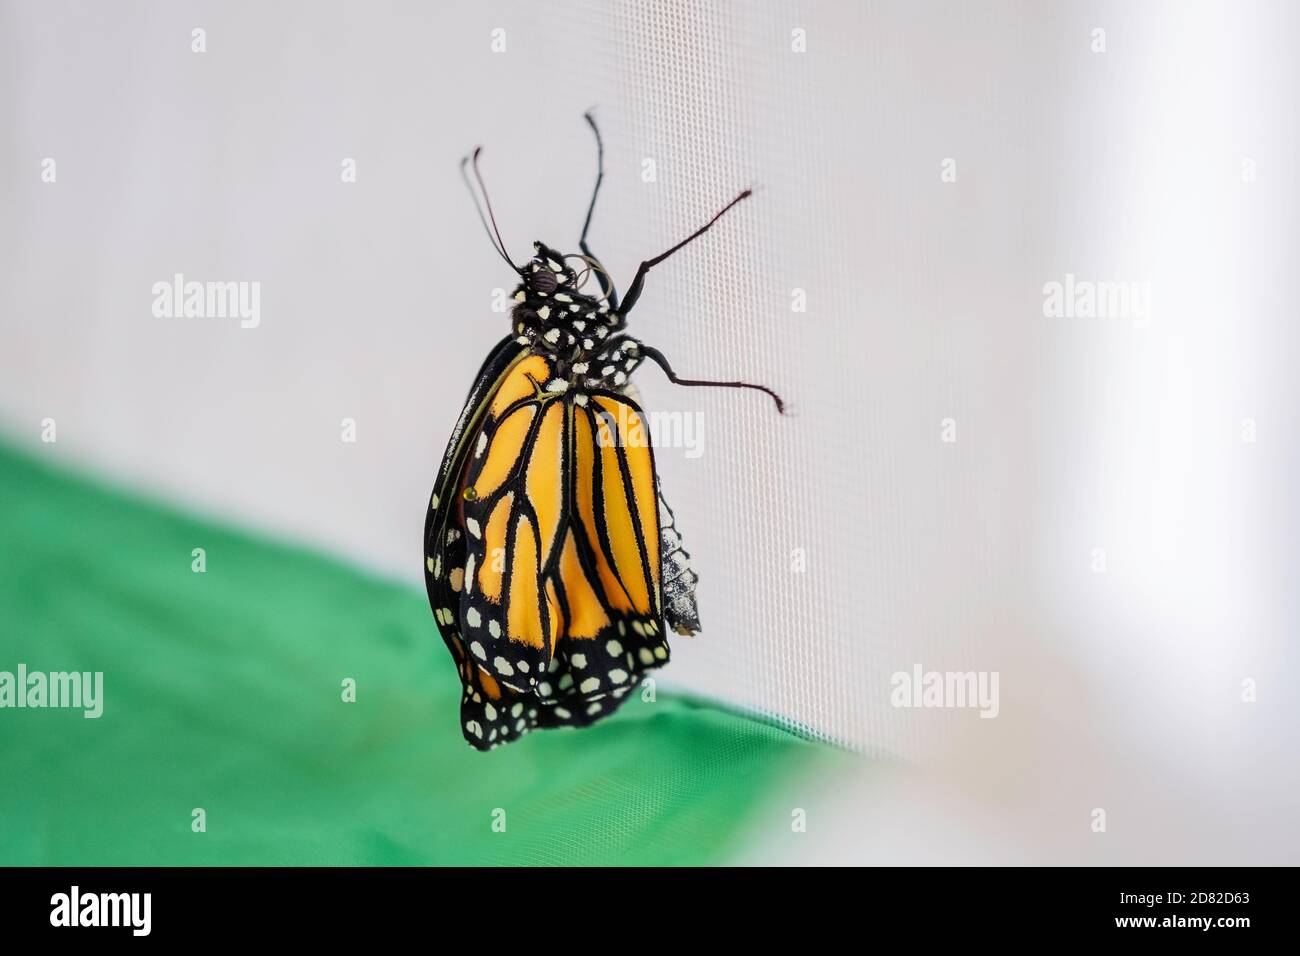 Monarch butterfly, Danaus plexippus. Newly emerged or enclosed from a chrysalis hand raised indoors inside a butterfly cage. Kansas, USA. Stock Photo